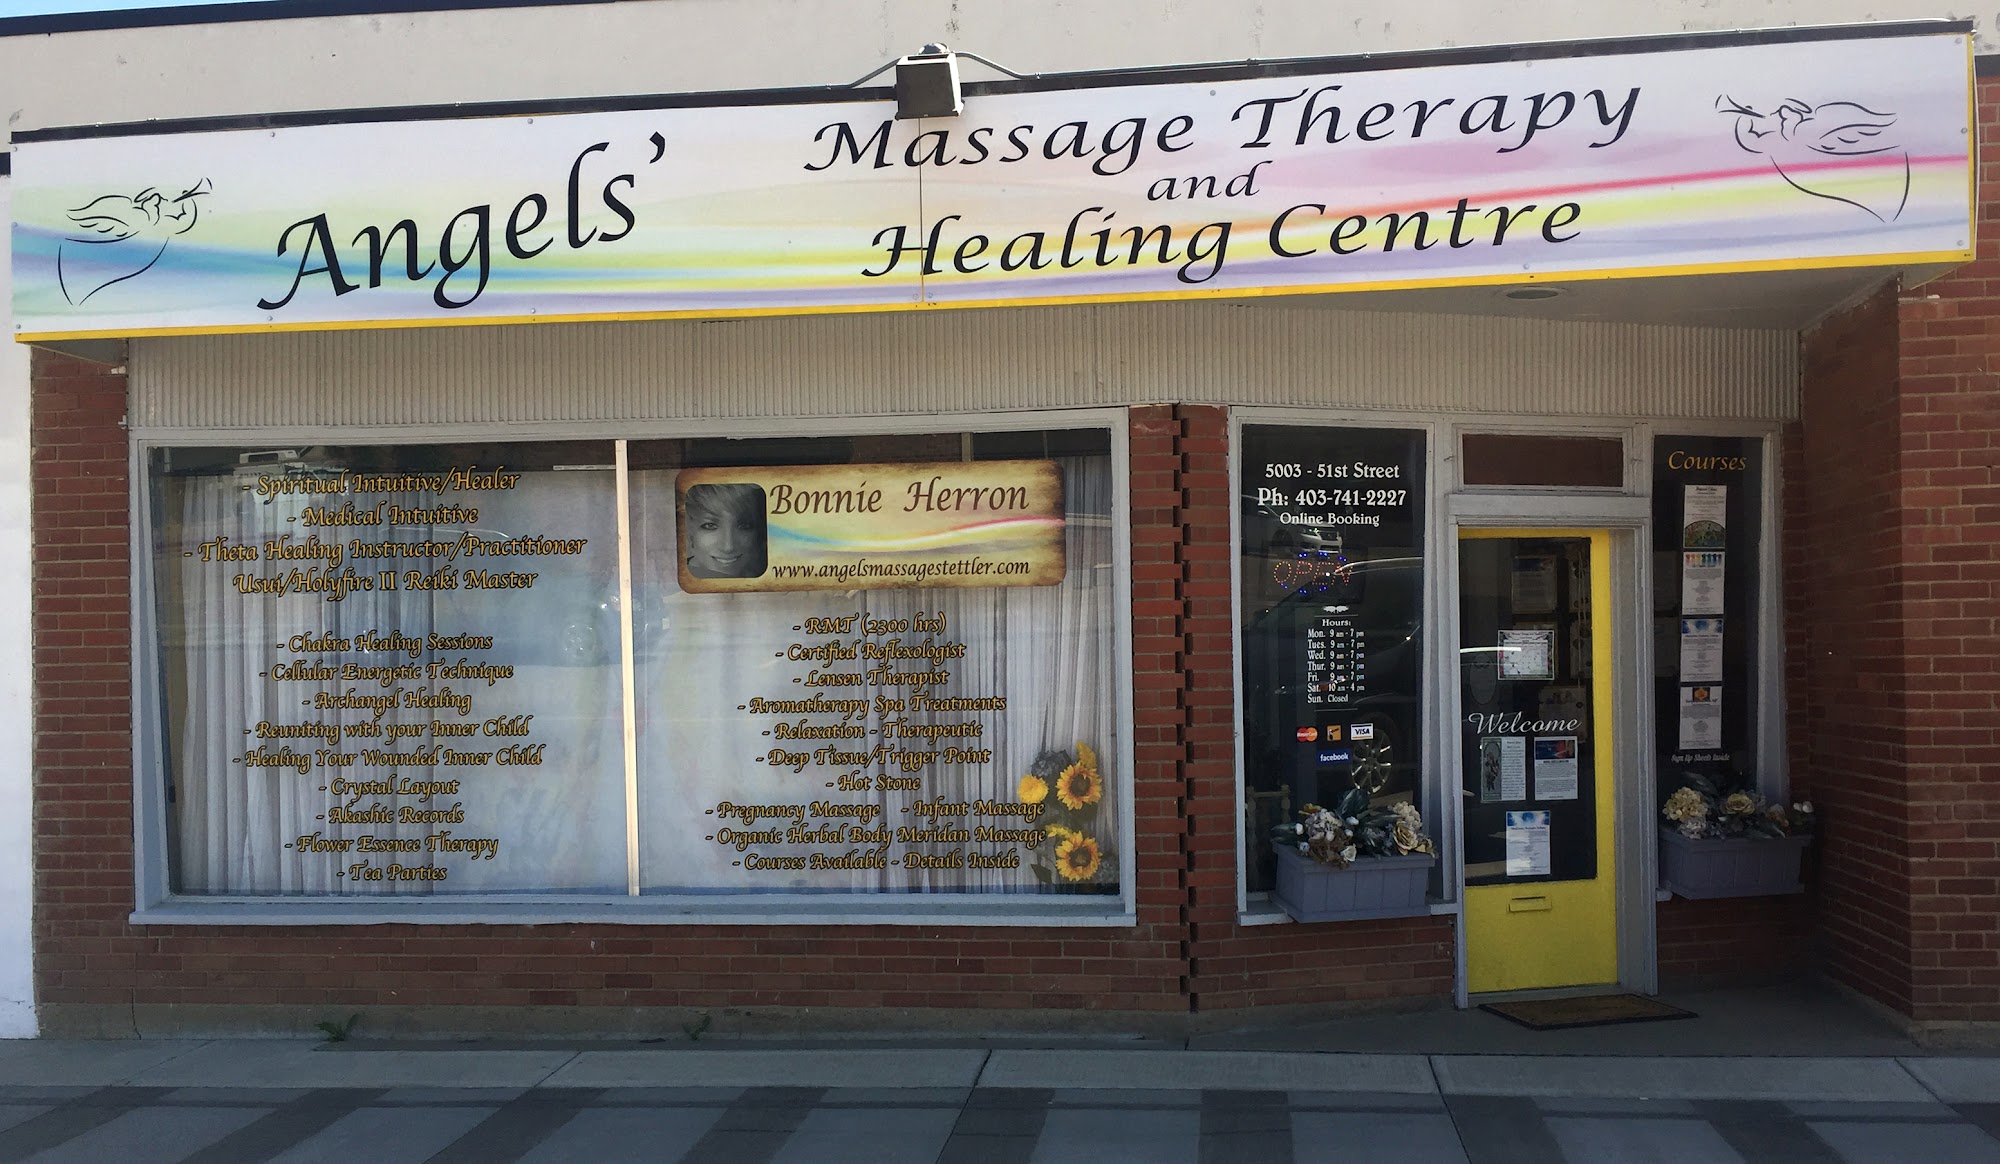 Angel's Massage Therapy & Healing Centre